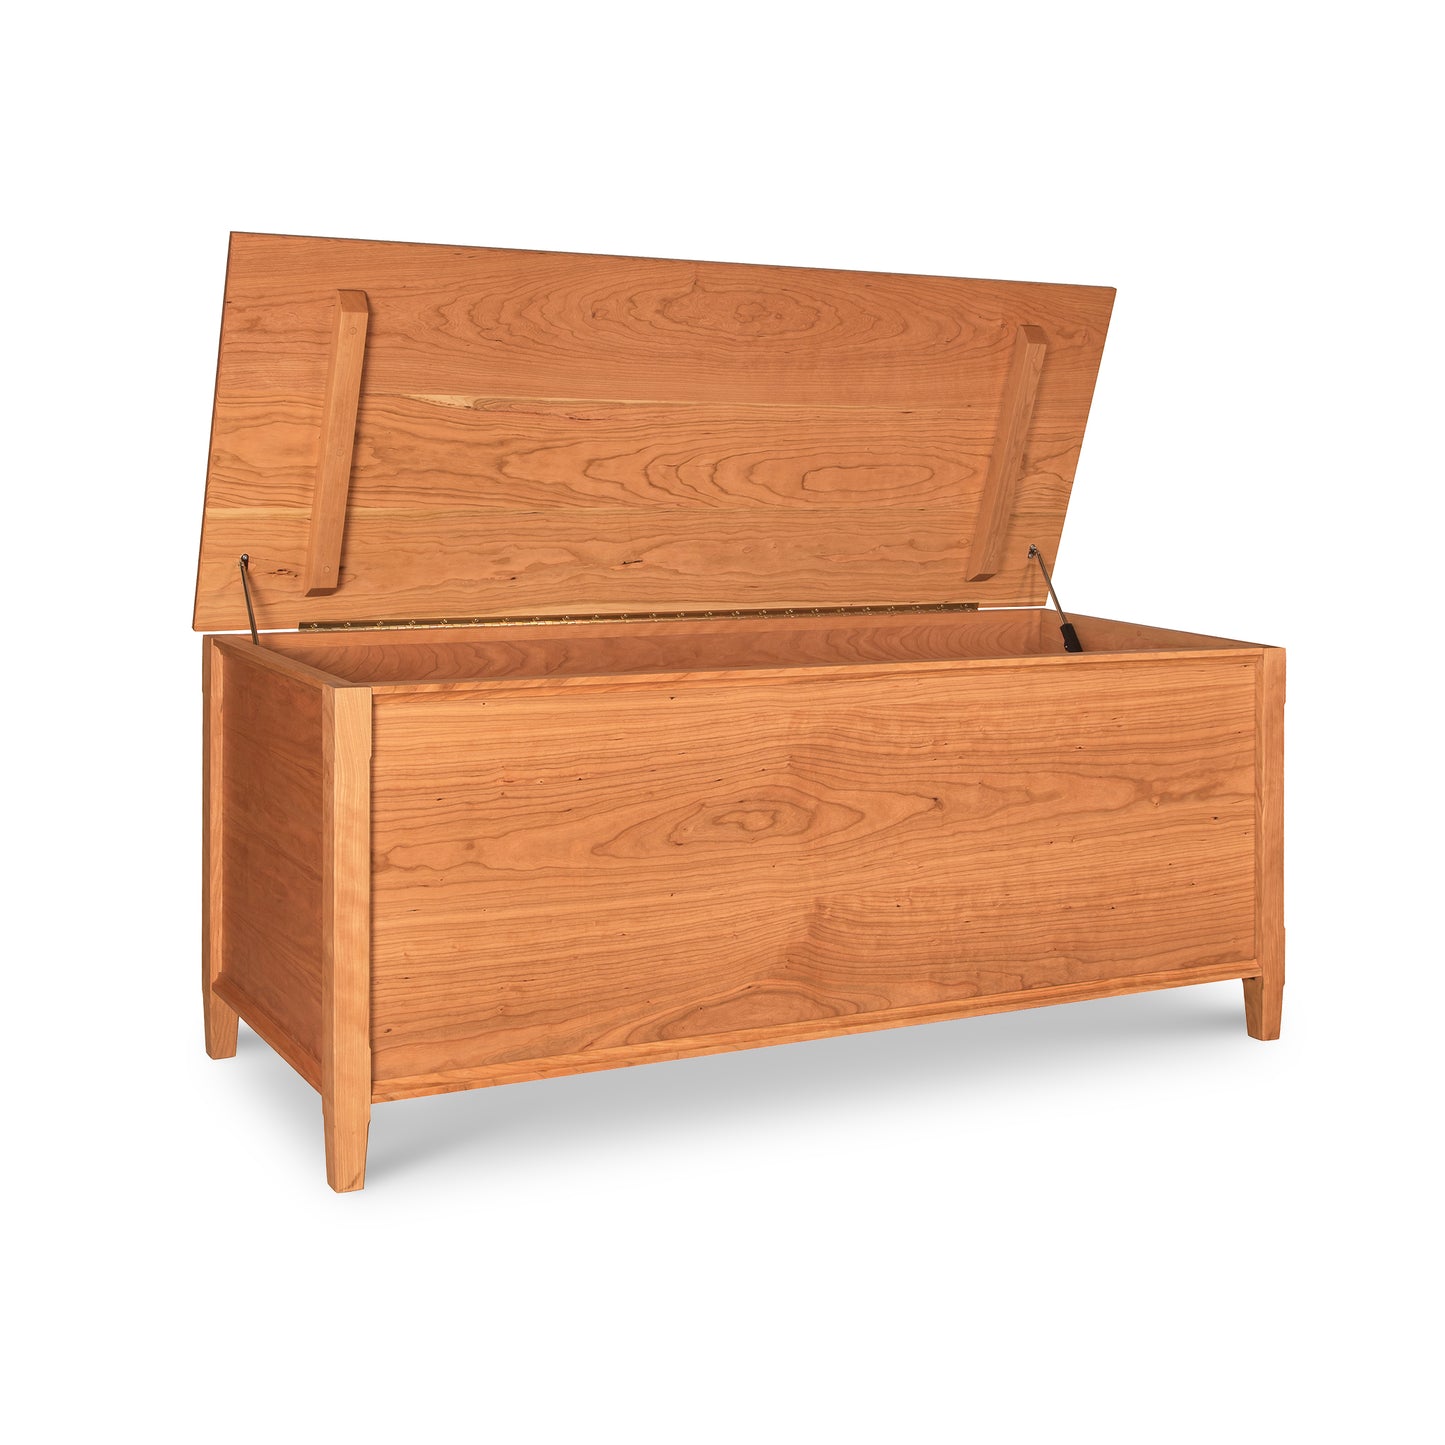 A Vermont Shaker Blanket Chest by Maple Corner Woodworks with the lid partially open, showcasing its spacious interior. The chest is crafted from sustainably harvested woods with visible grain patterns, positioned against a white background.